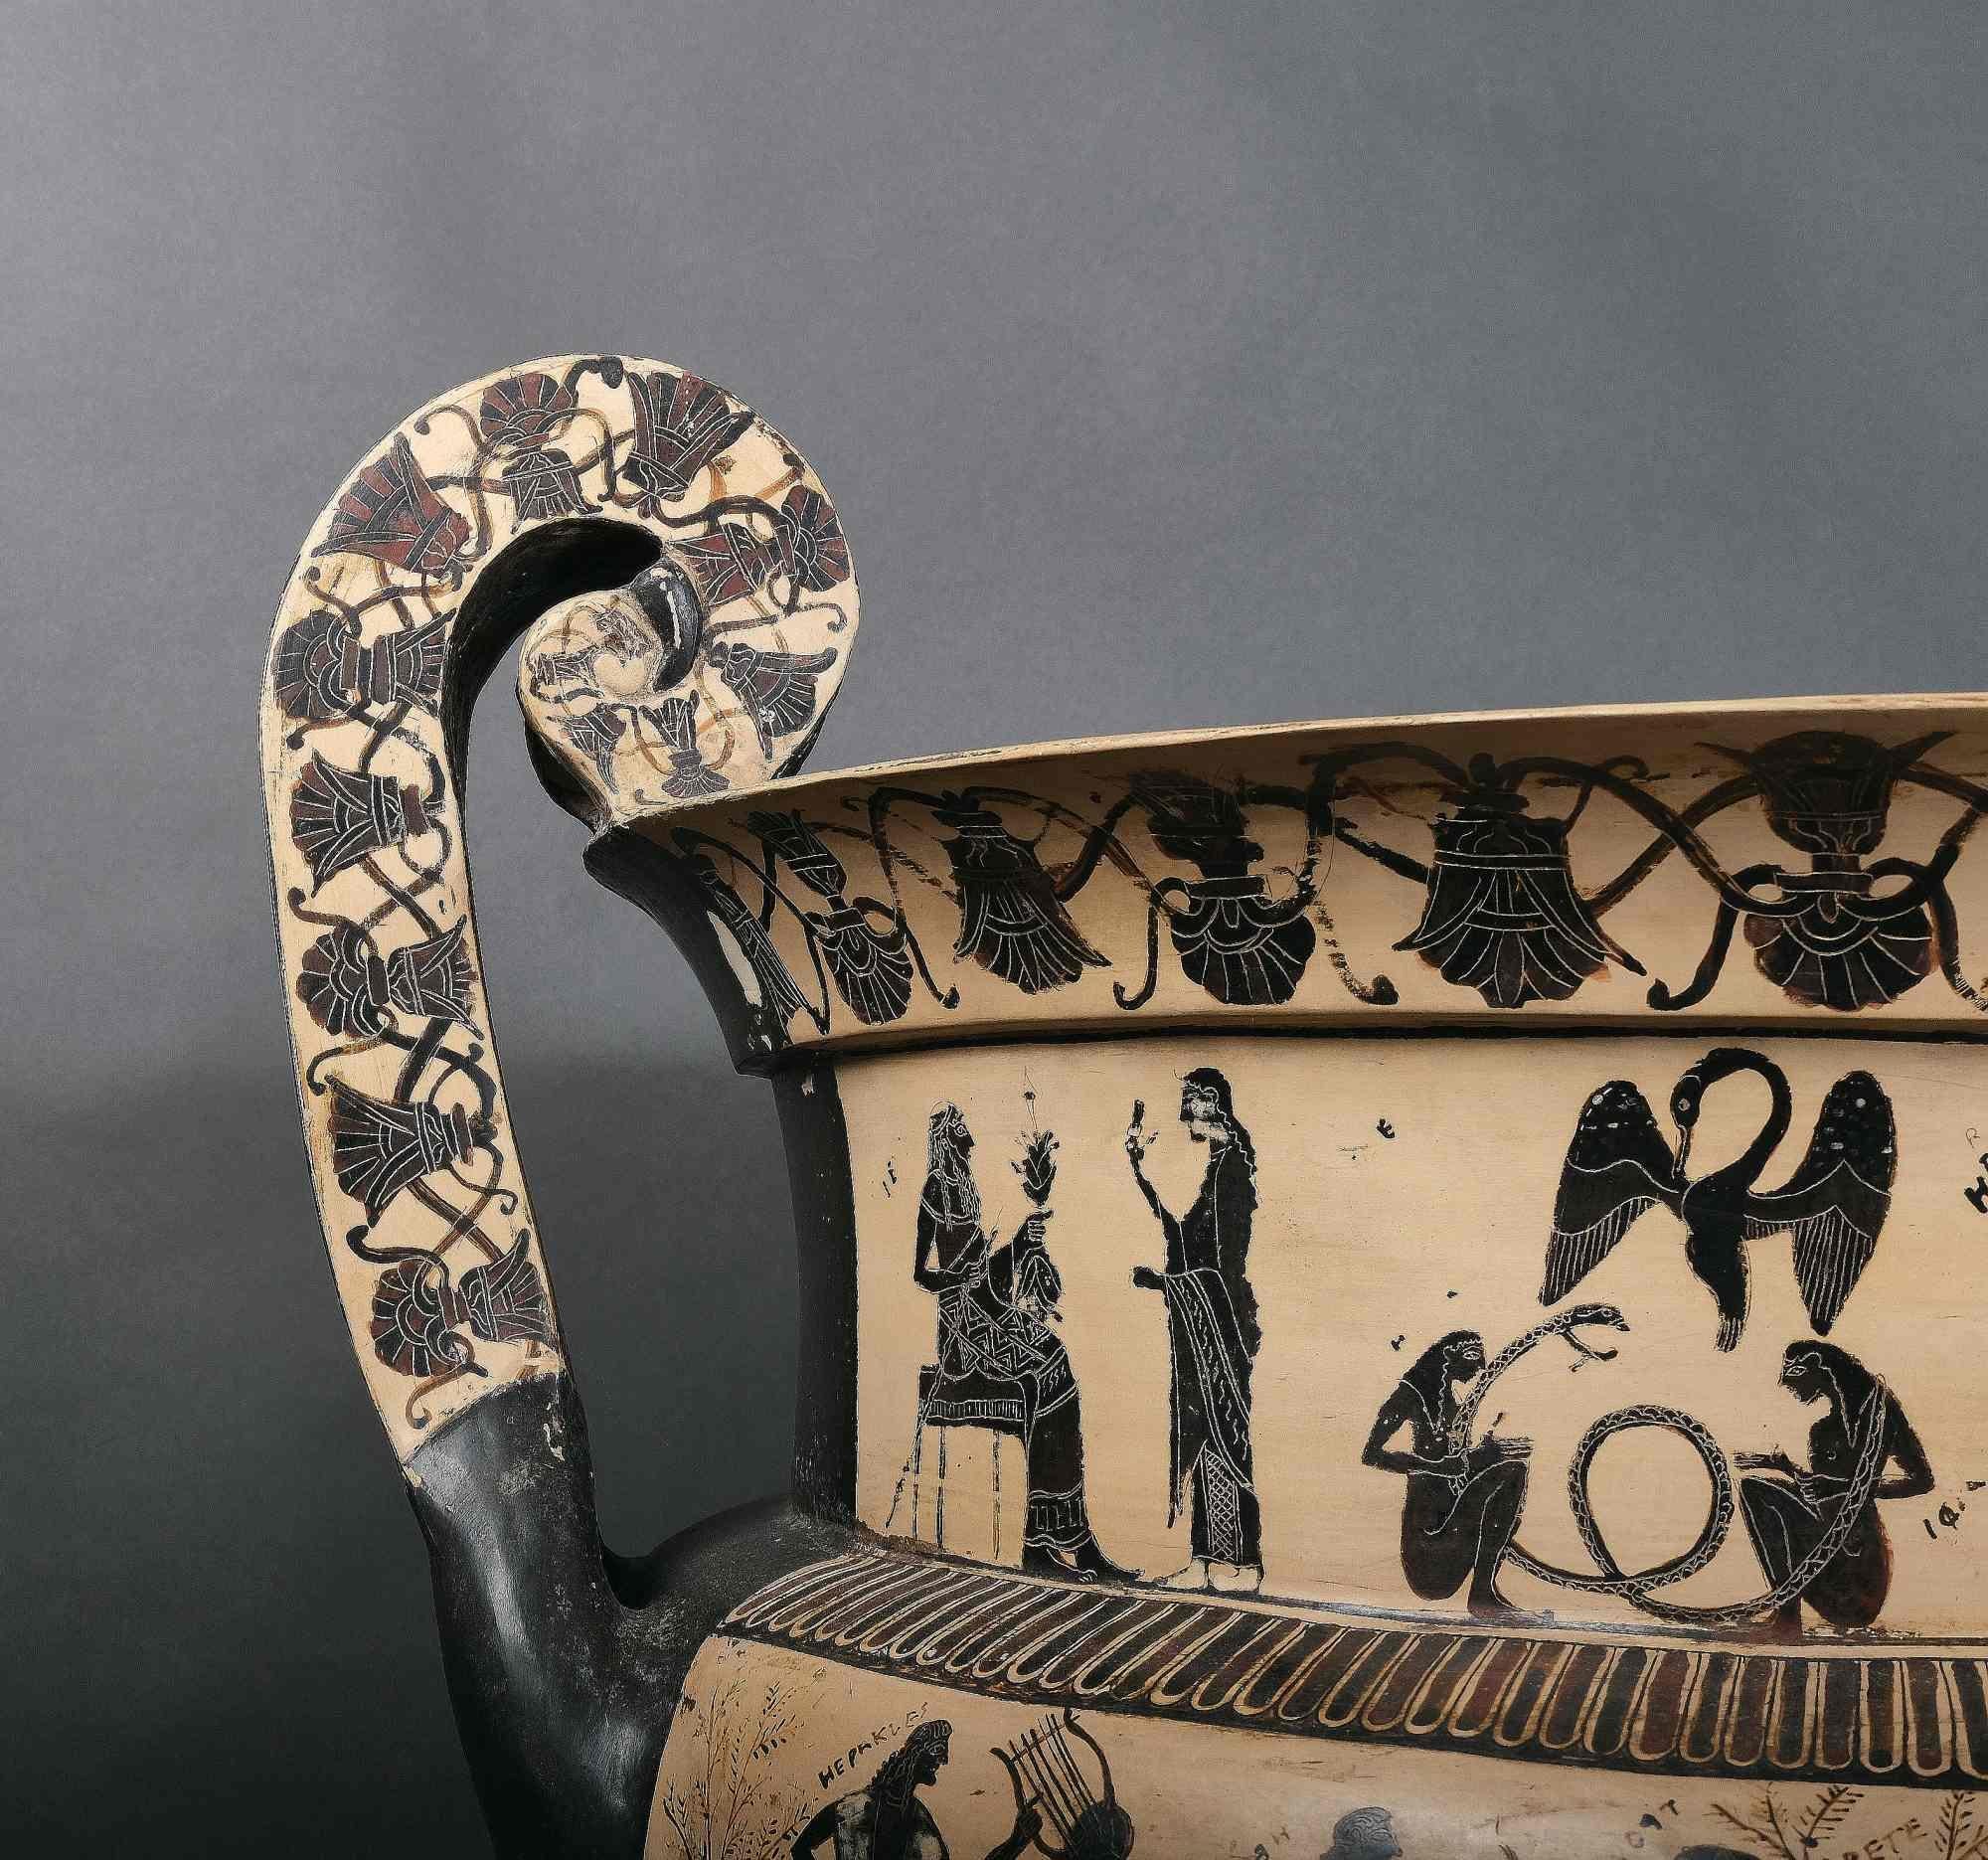 Unusually large crater with extensive depictions of Greek mythology. Light ceramic in terracotta color with ebonized paint. Two protruding volute handles adorn the sides. The huge size of this crater is exceptionally rare, as is the composition of